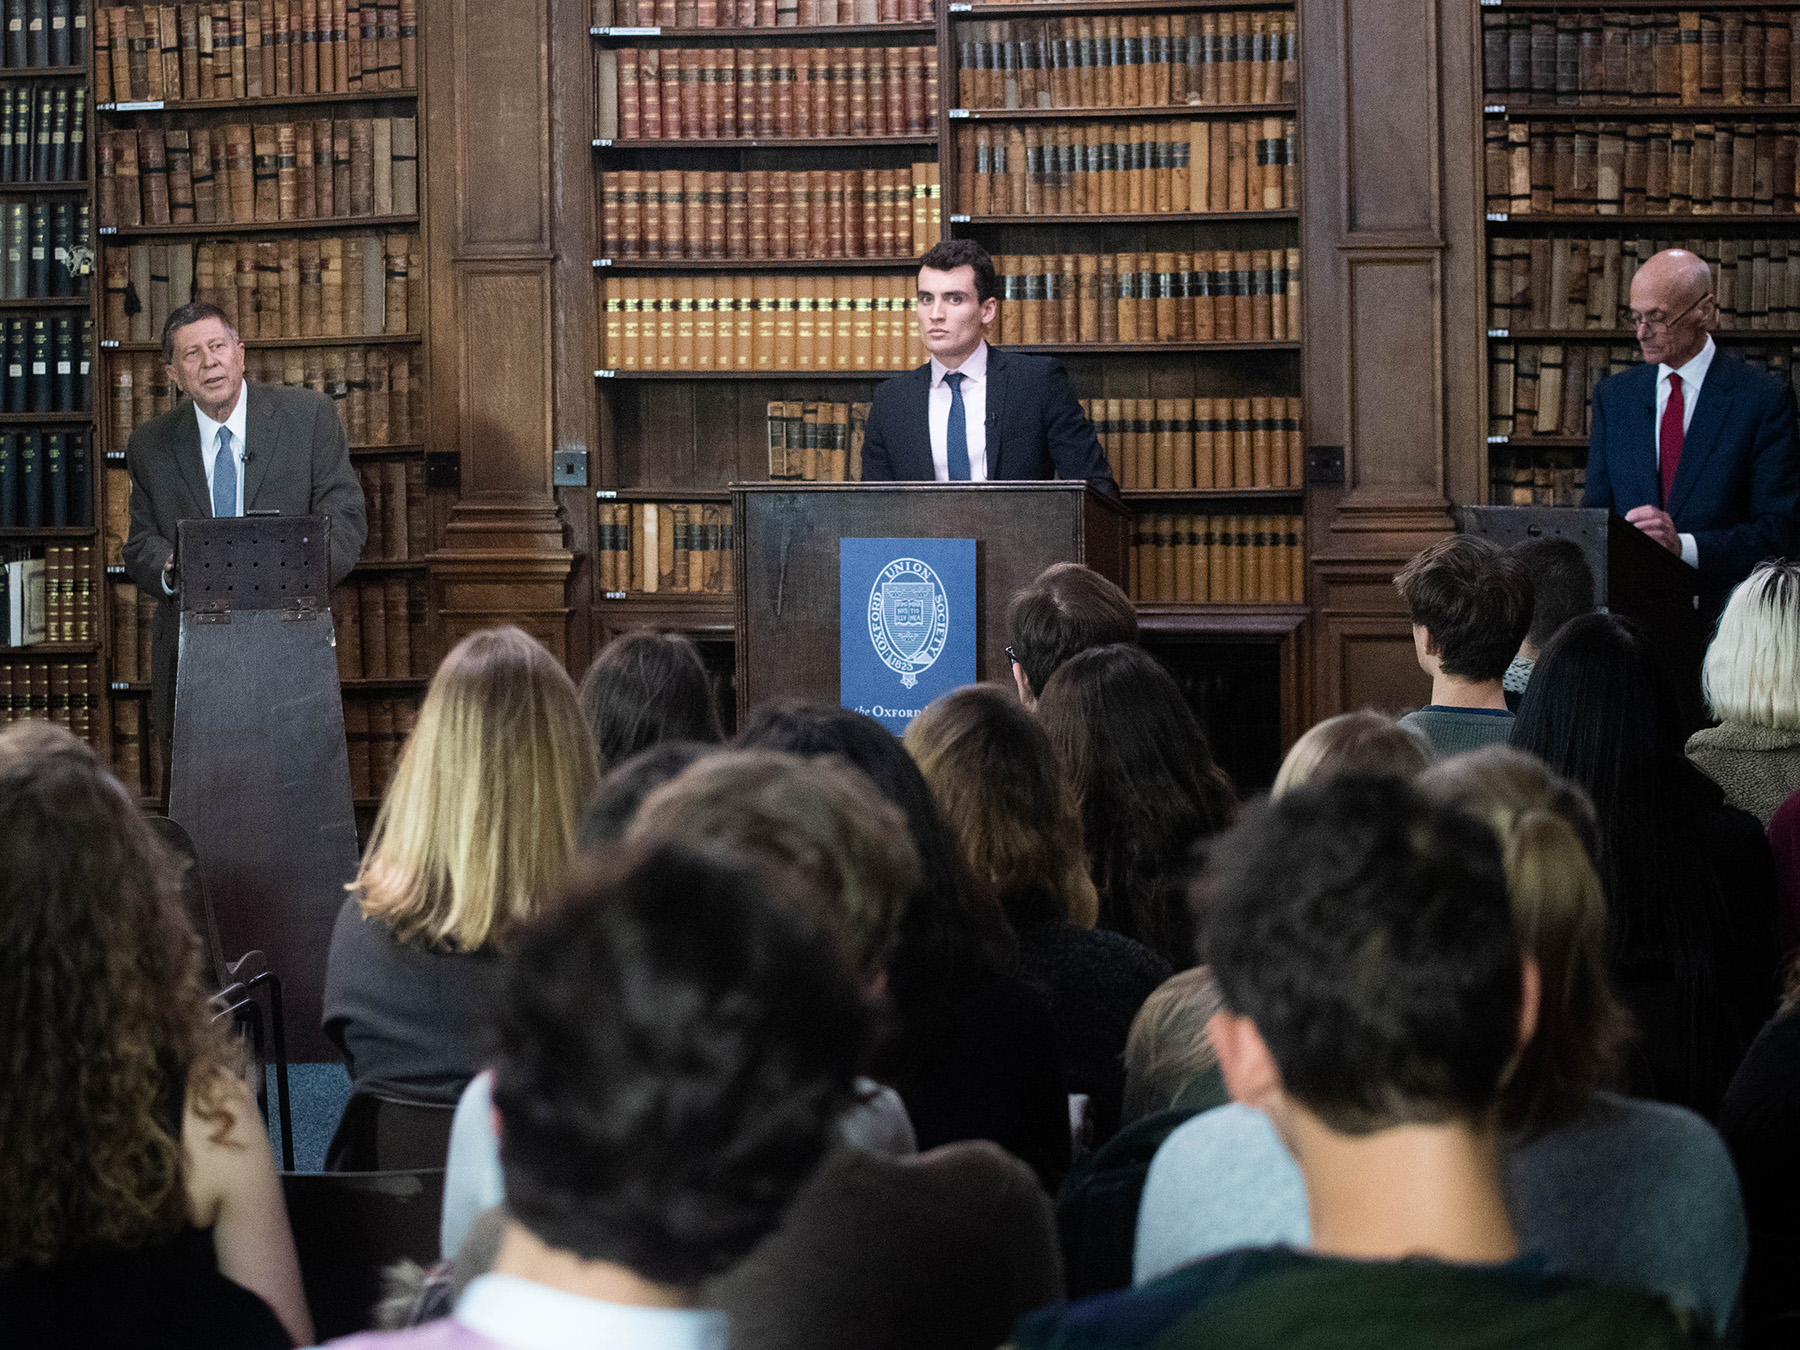 UA historian David Gibbs (at left) debated Michael Chertoff, former Secretary of Homeland Security, at Oxford Union on March 4, 2019, about humanitarian intervention. 